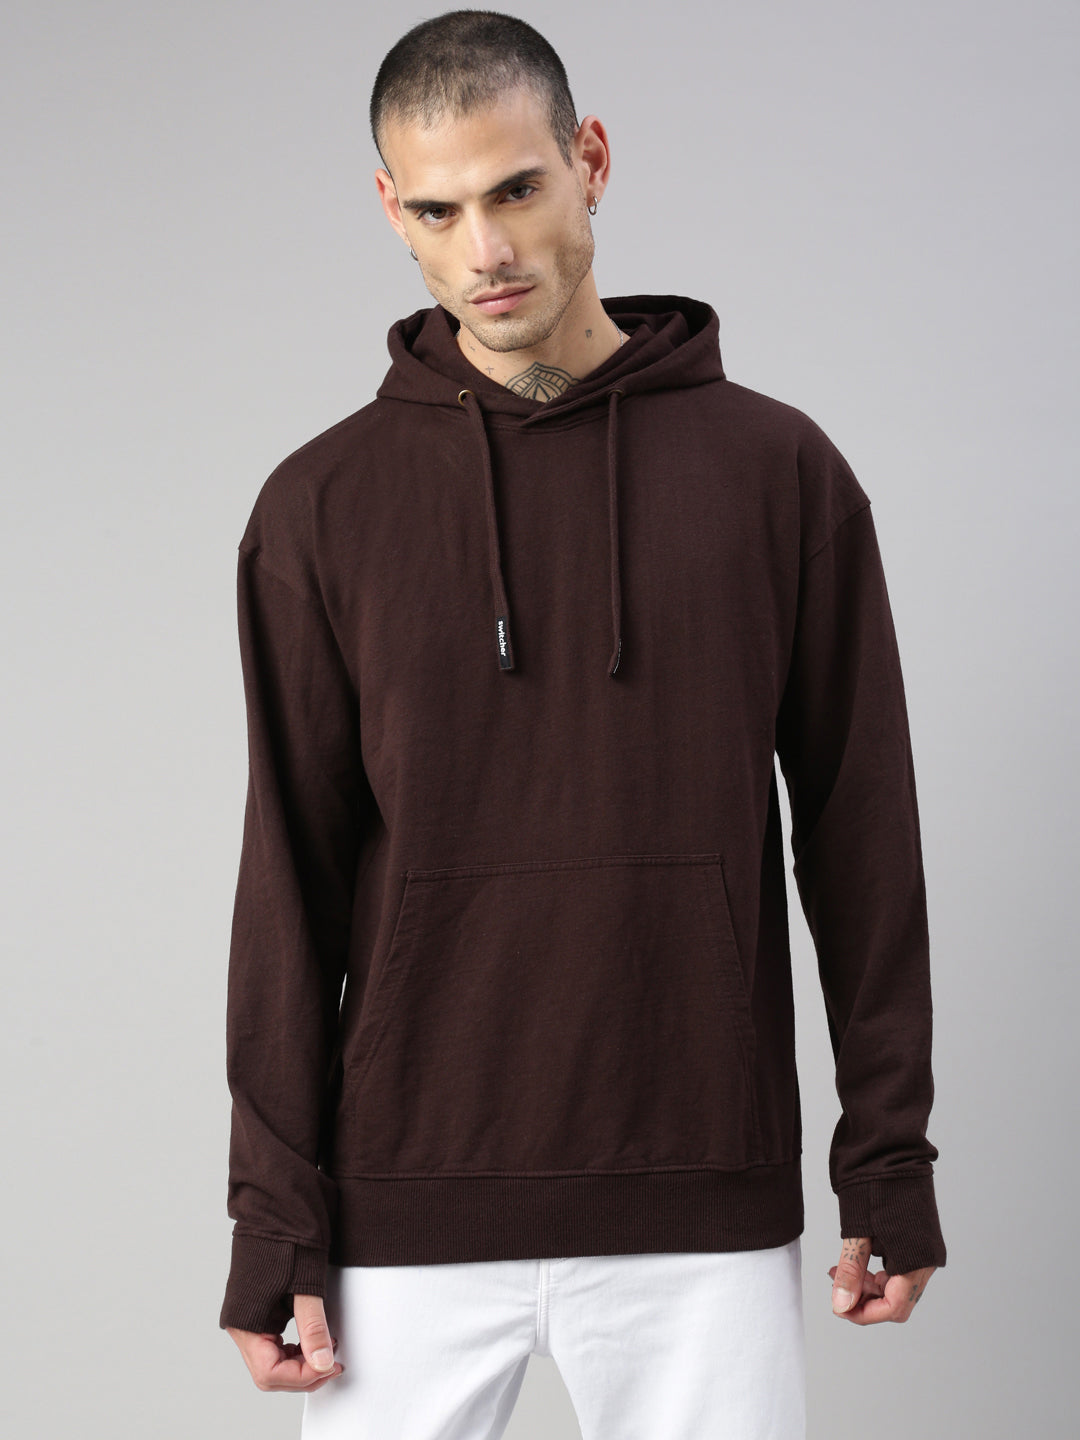 Cafe hoodie for men by switcher